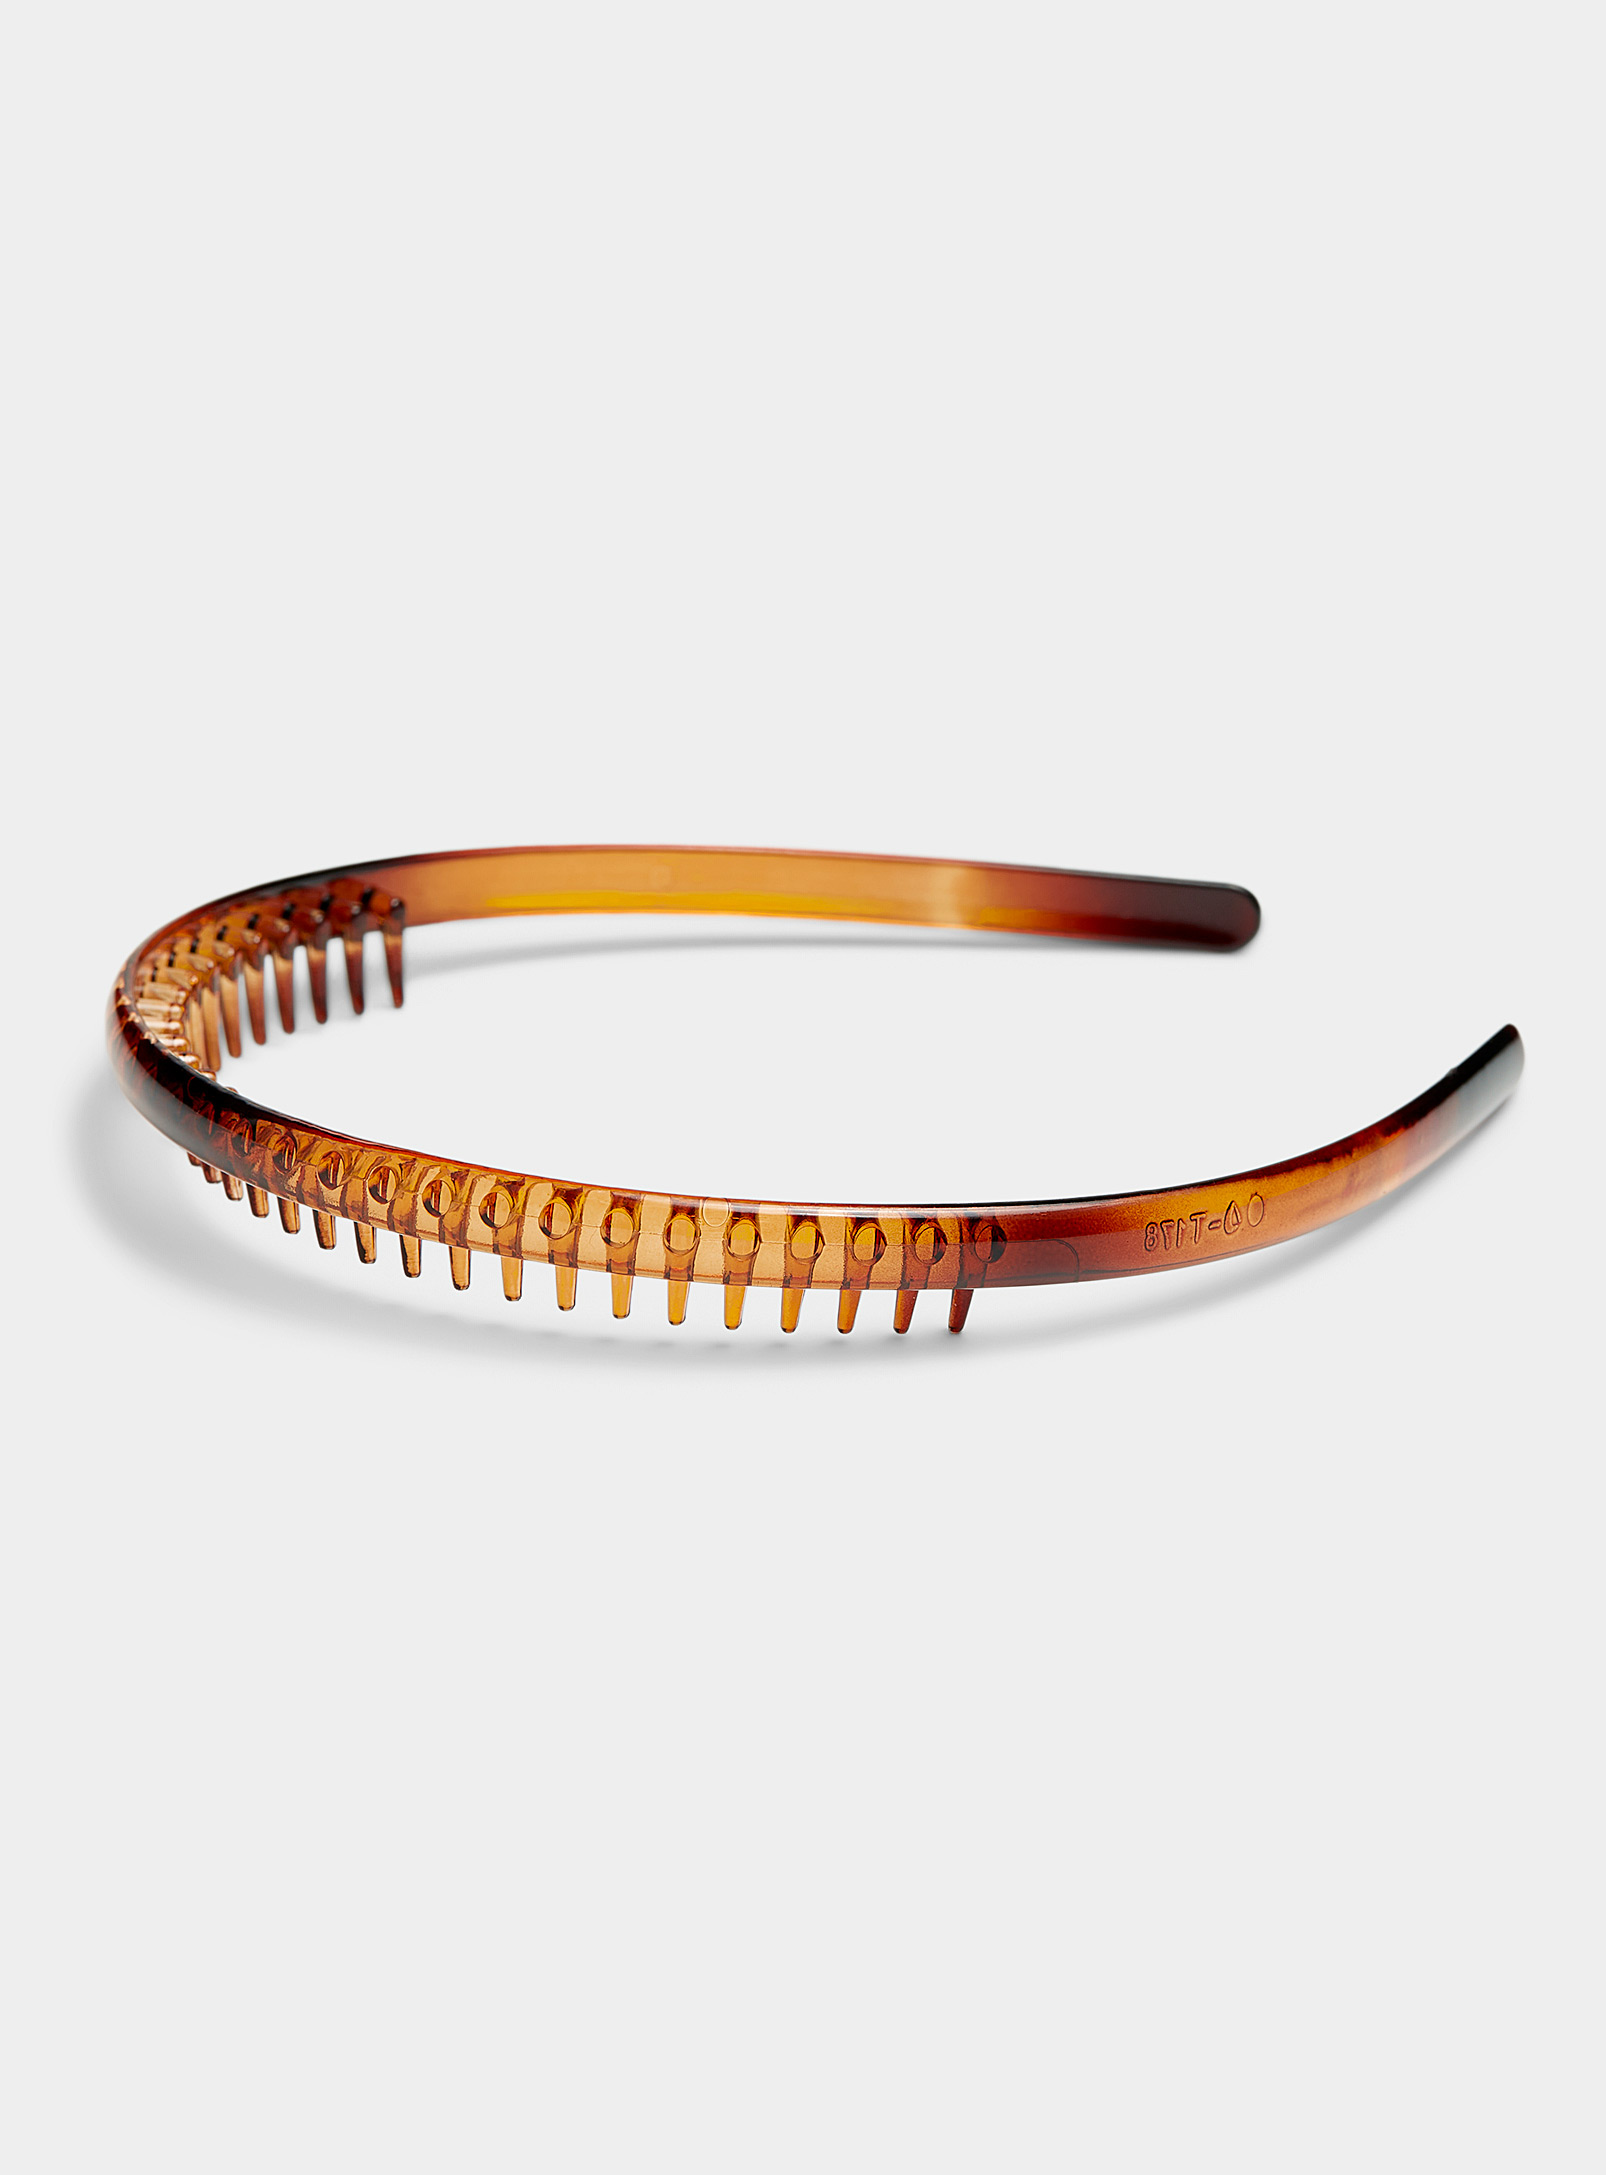 Simons - Women's Toothed headband